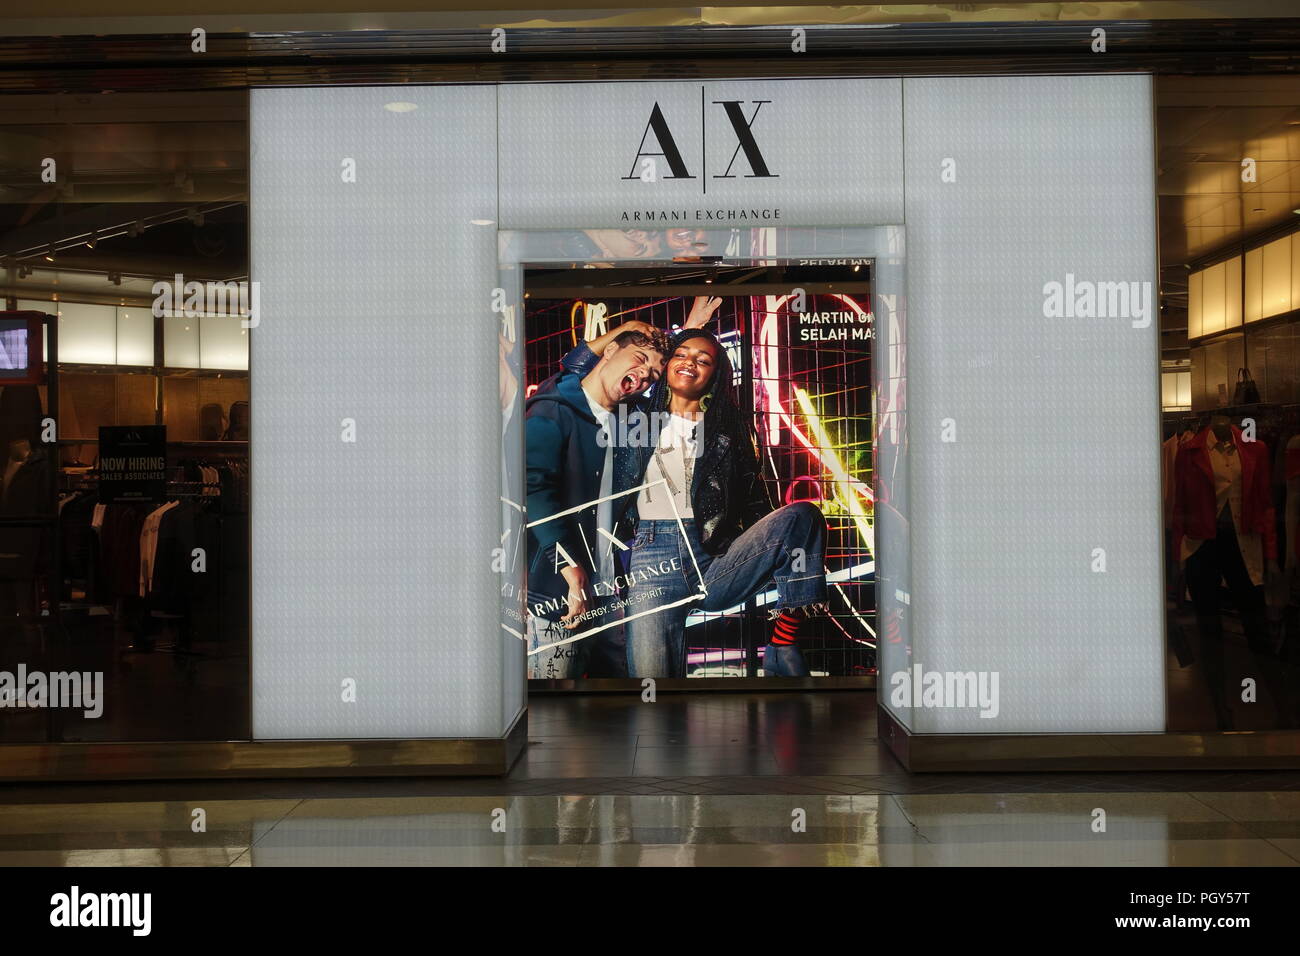 AX Armani Exchange store located at 